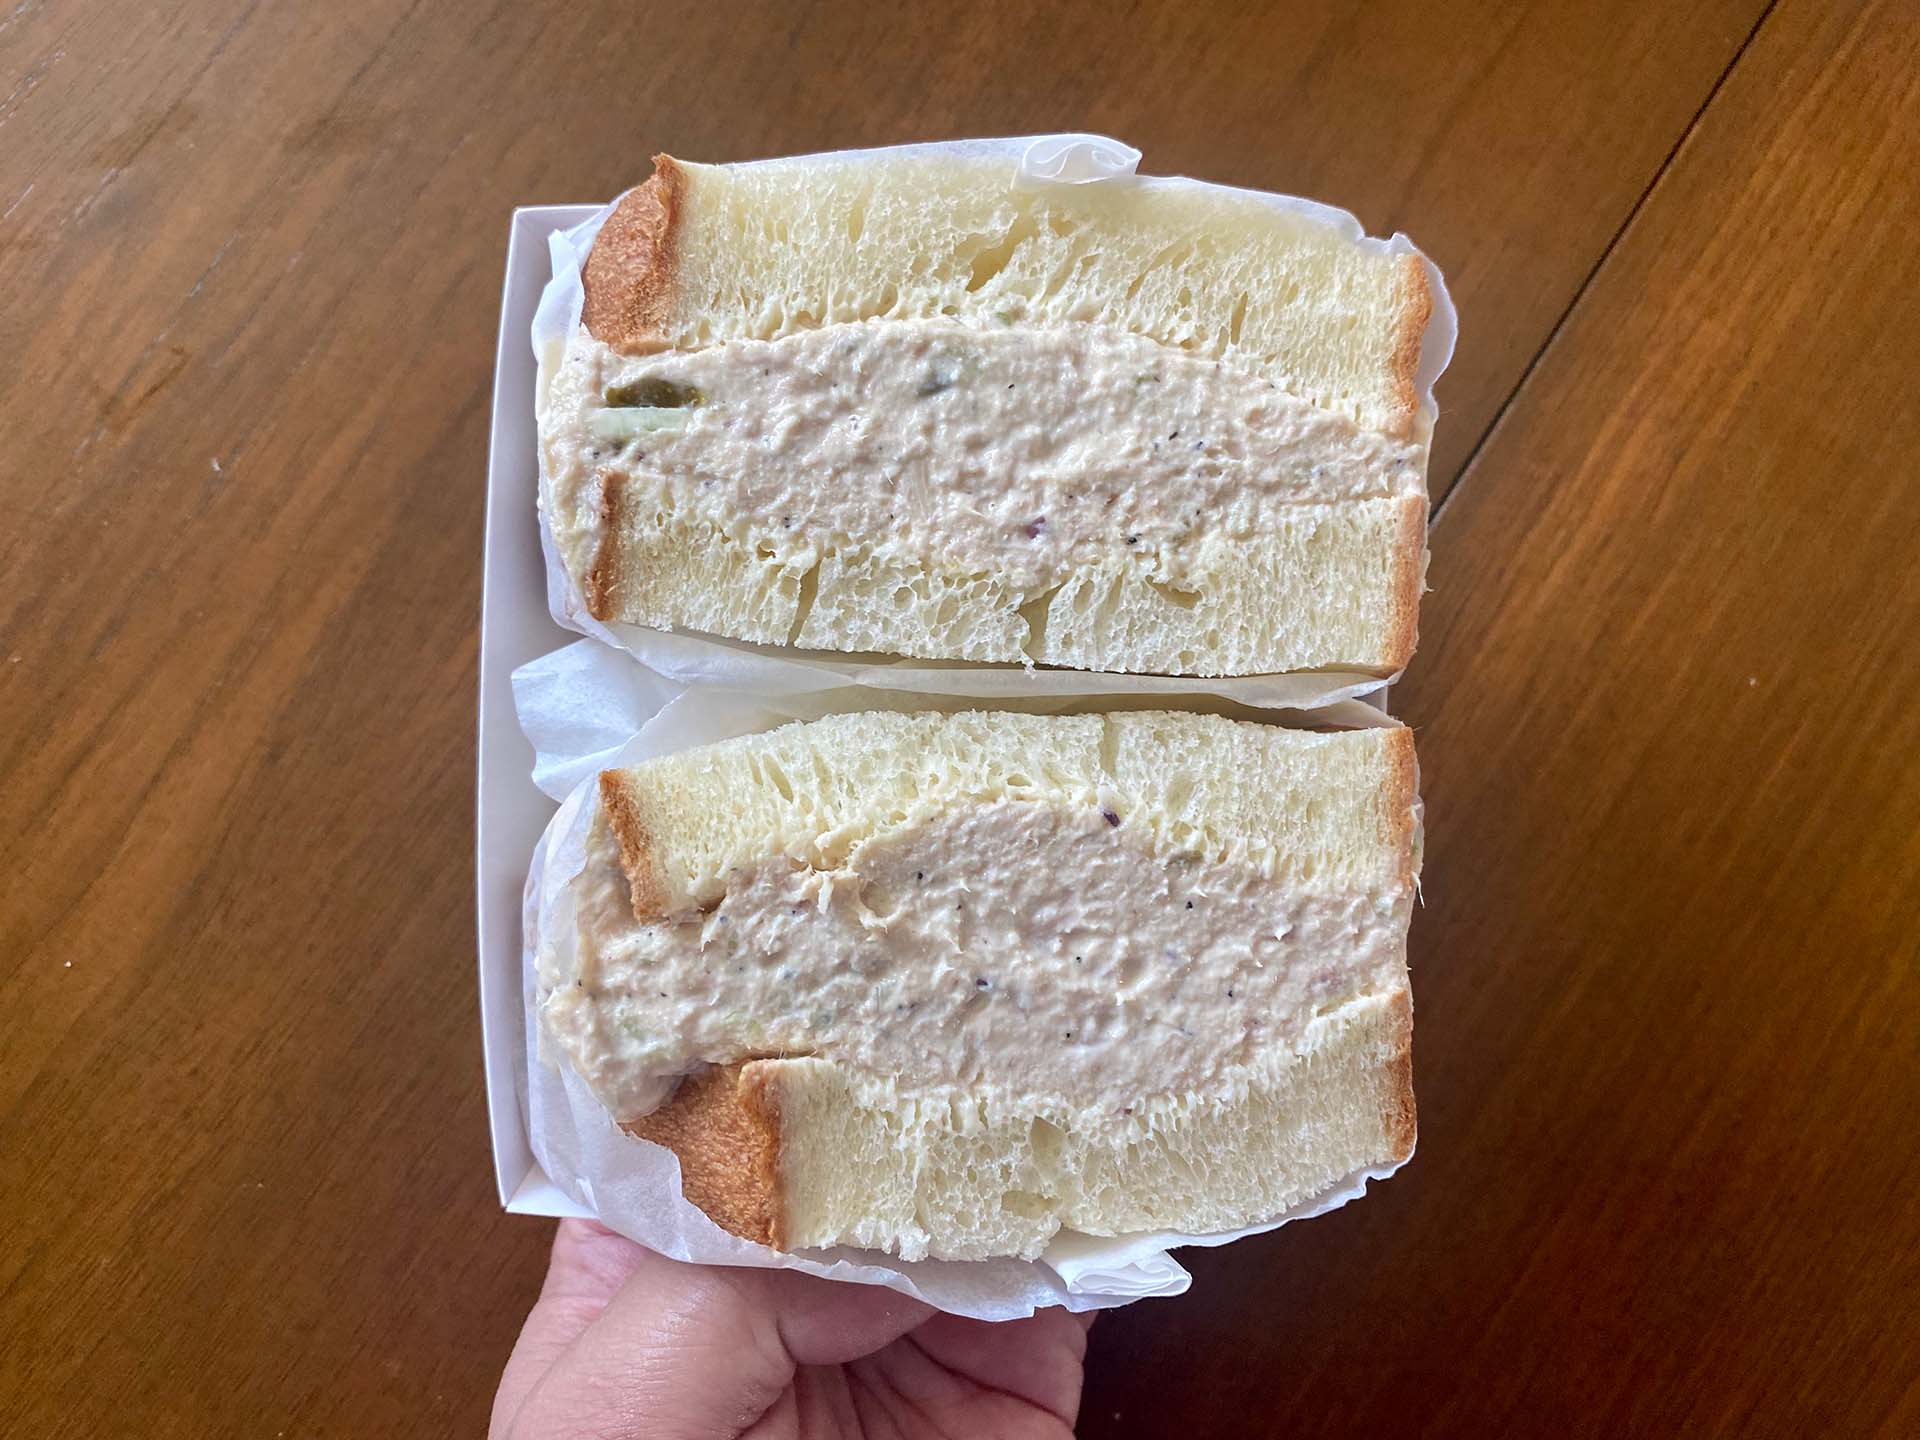 The cross section of a tuna salad sandwich made with thick slices of milkbread.